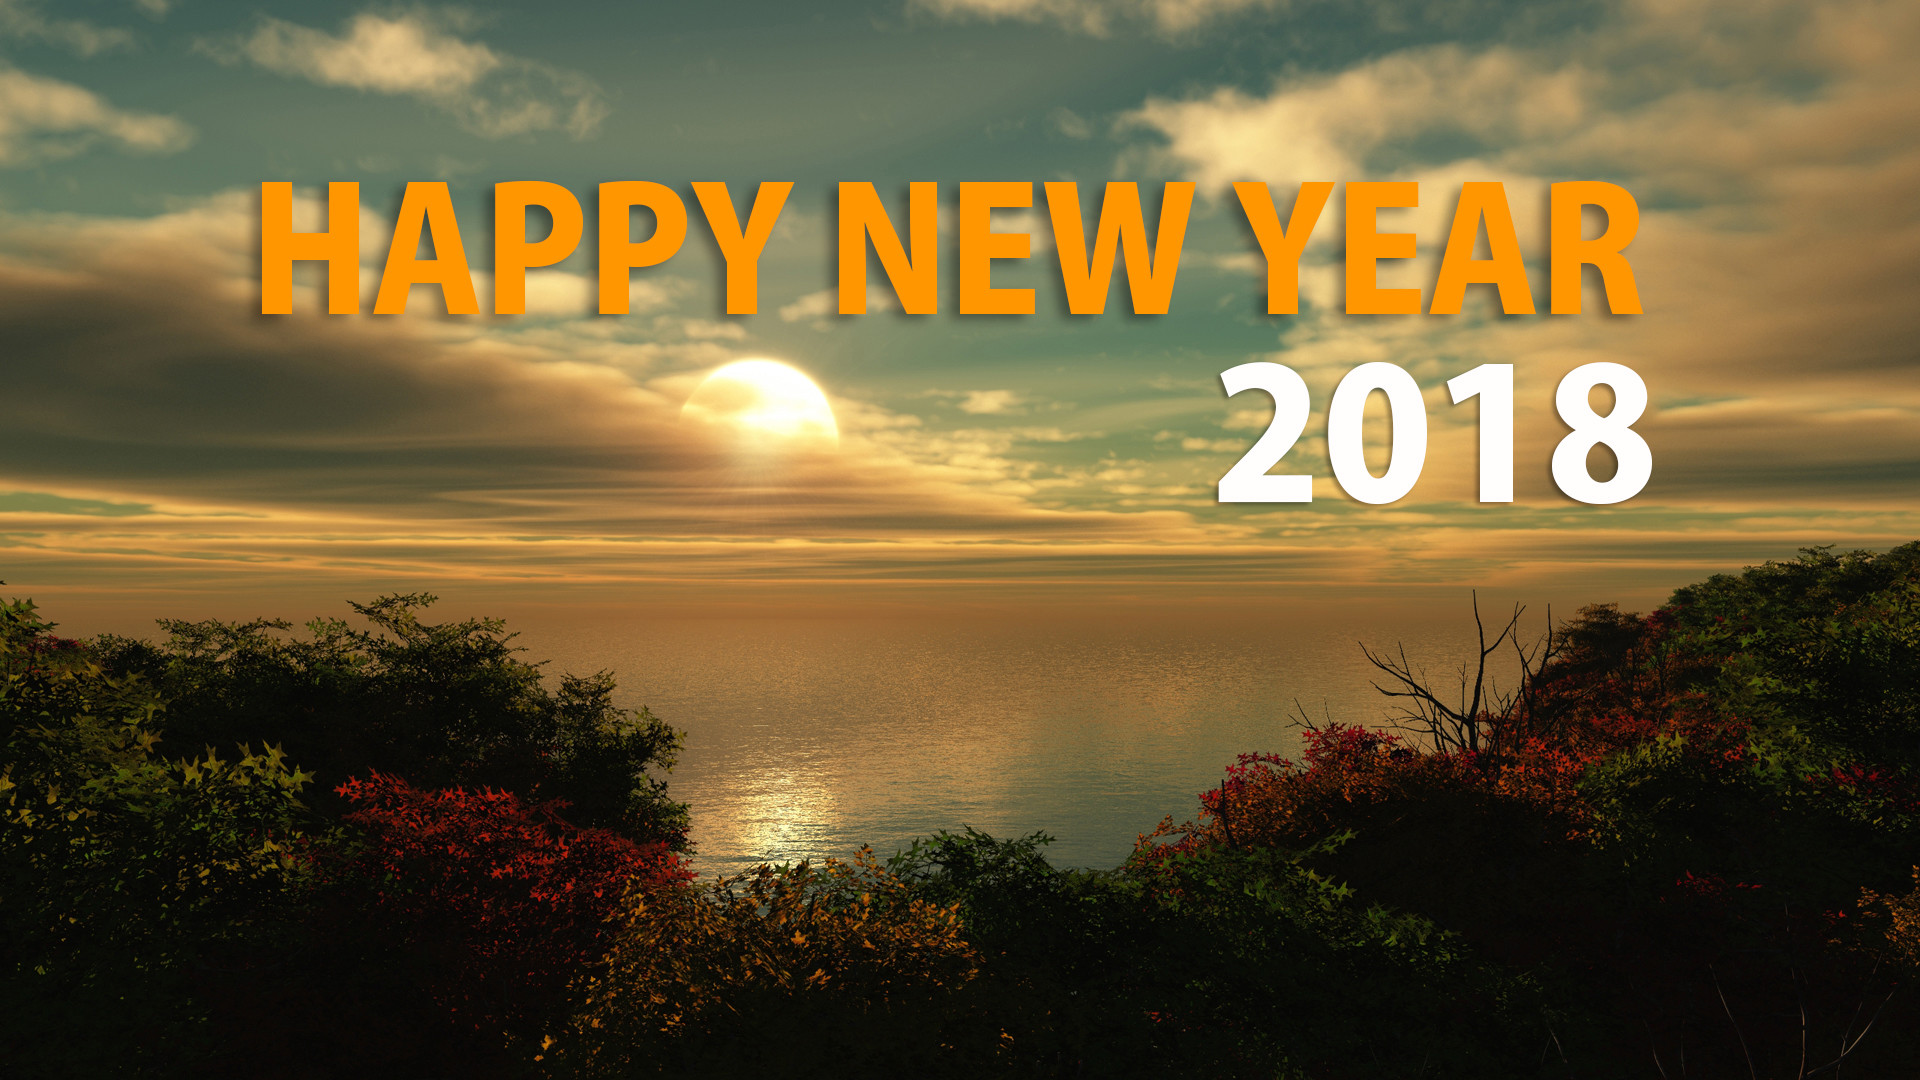 1920x1080 Happy New Year Images Animation Images: